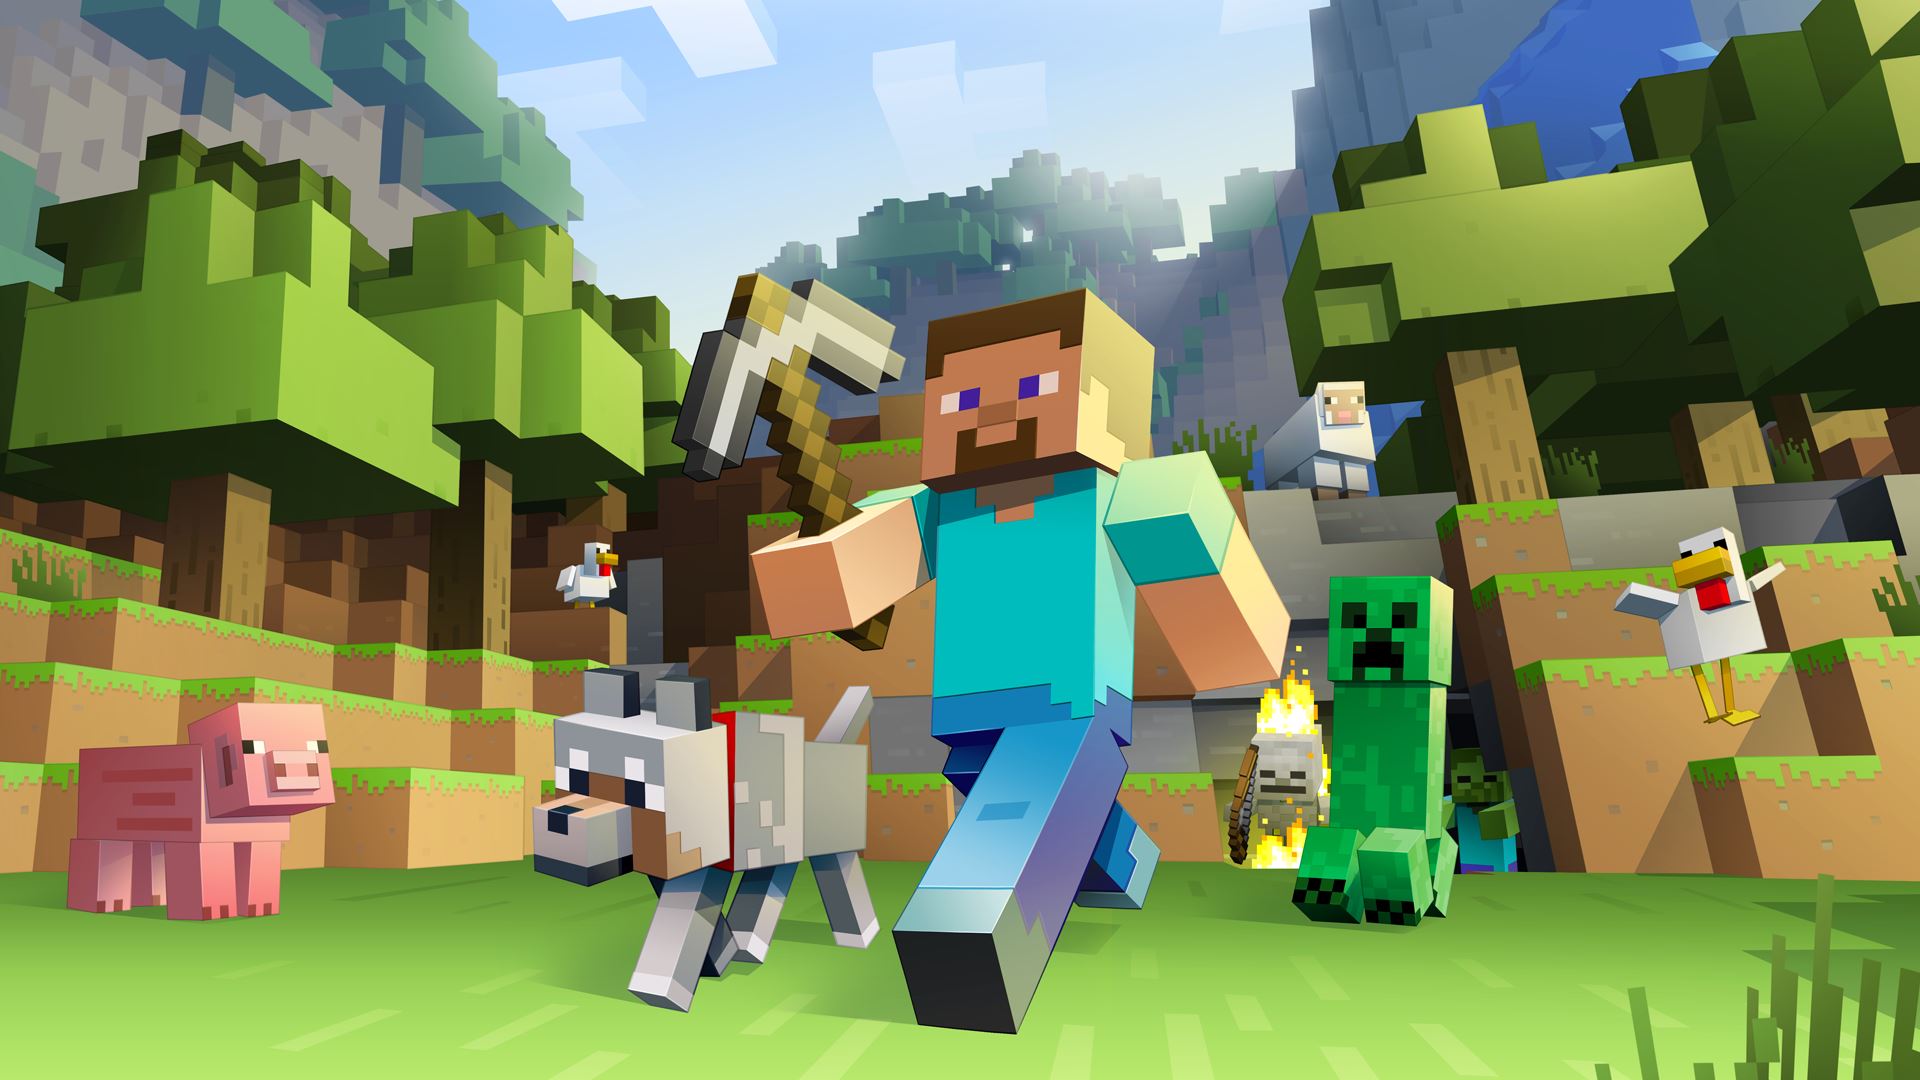 Minecraft: an addictive game for kids